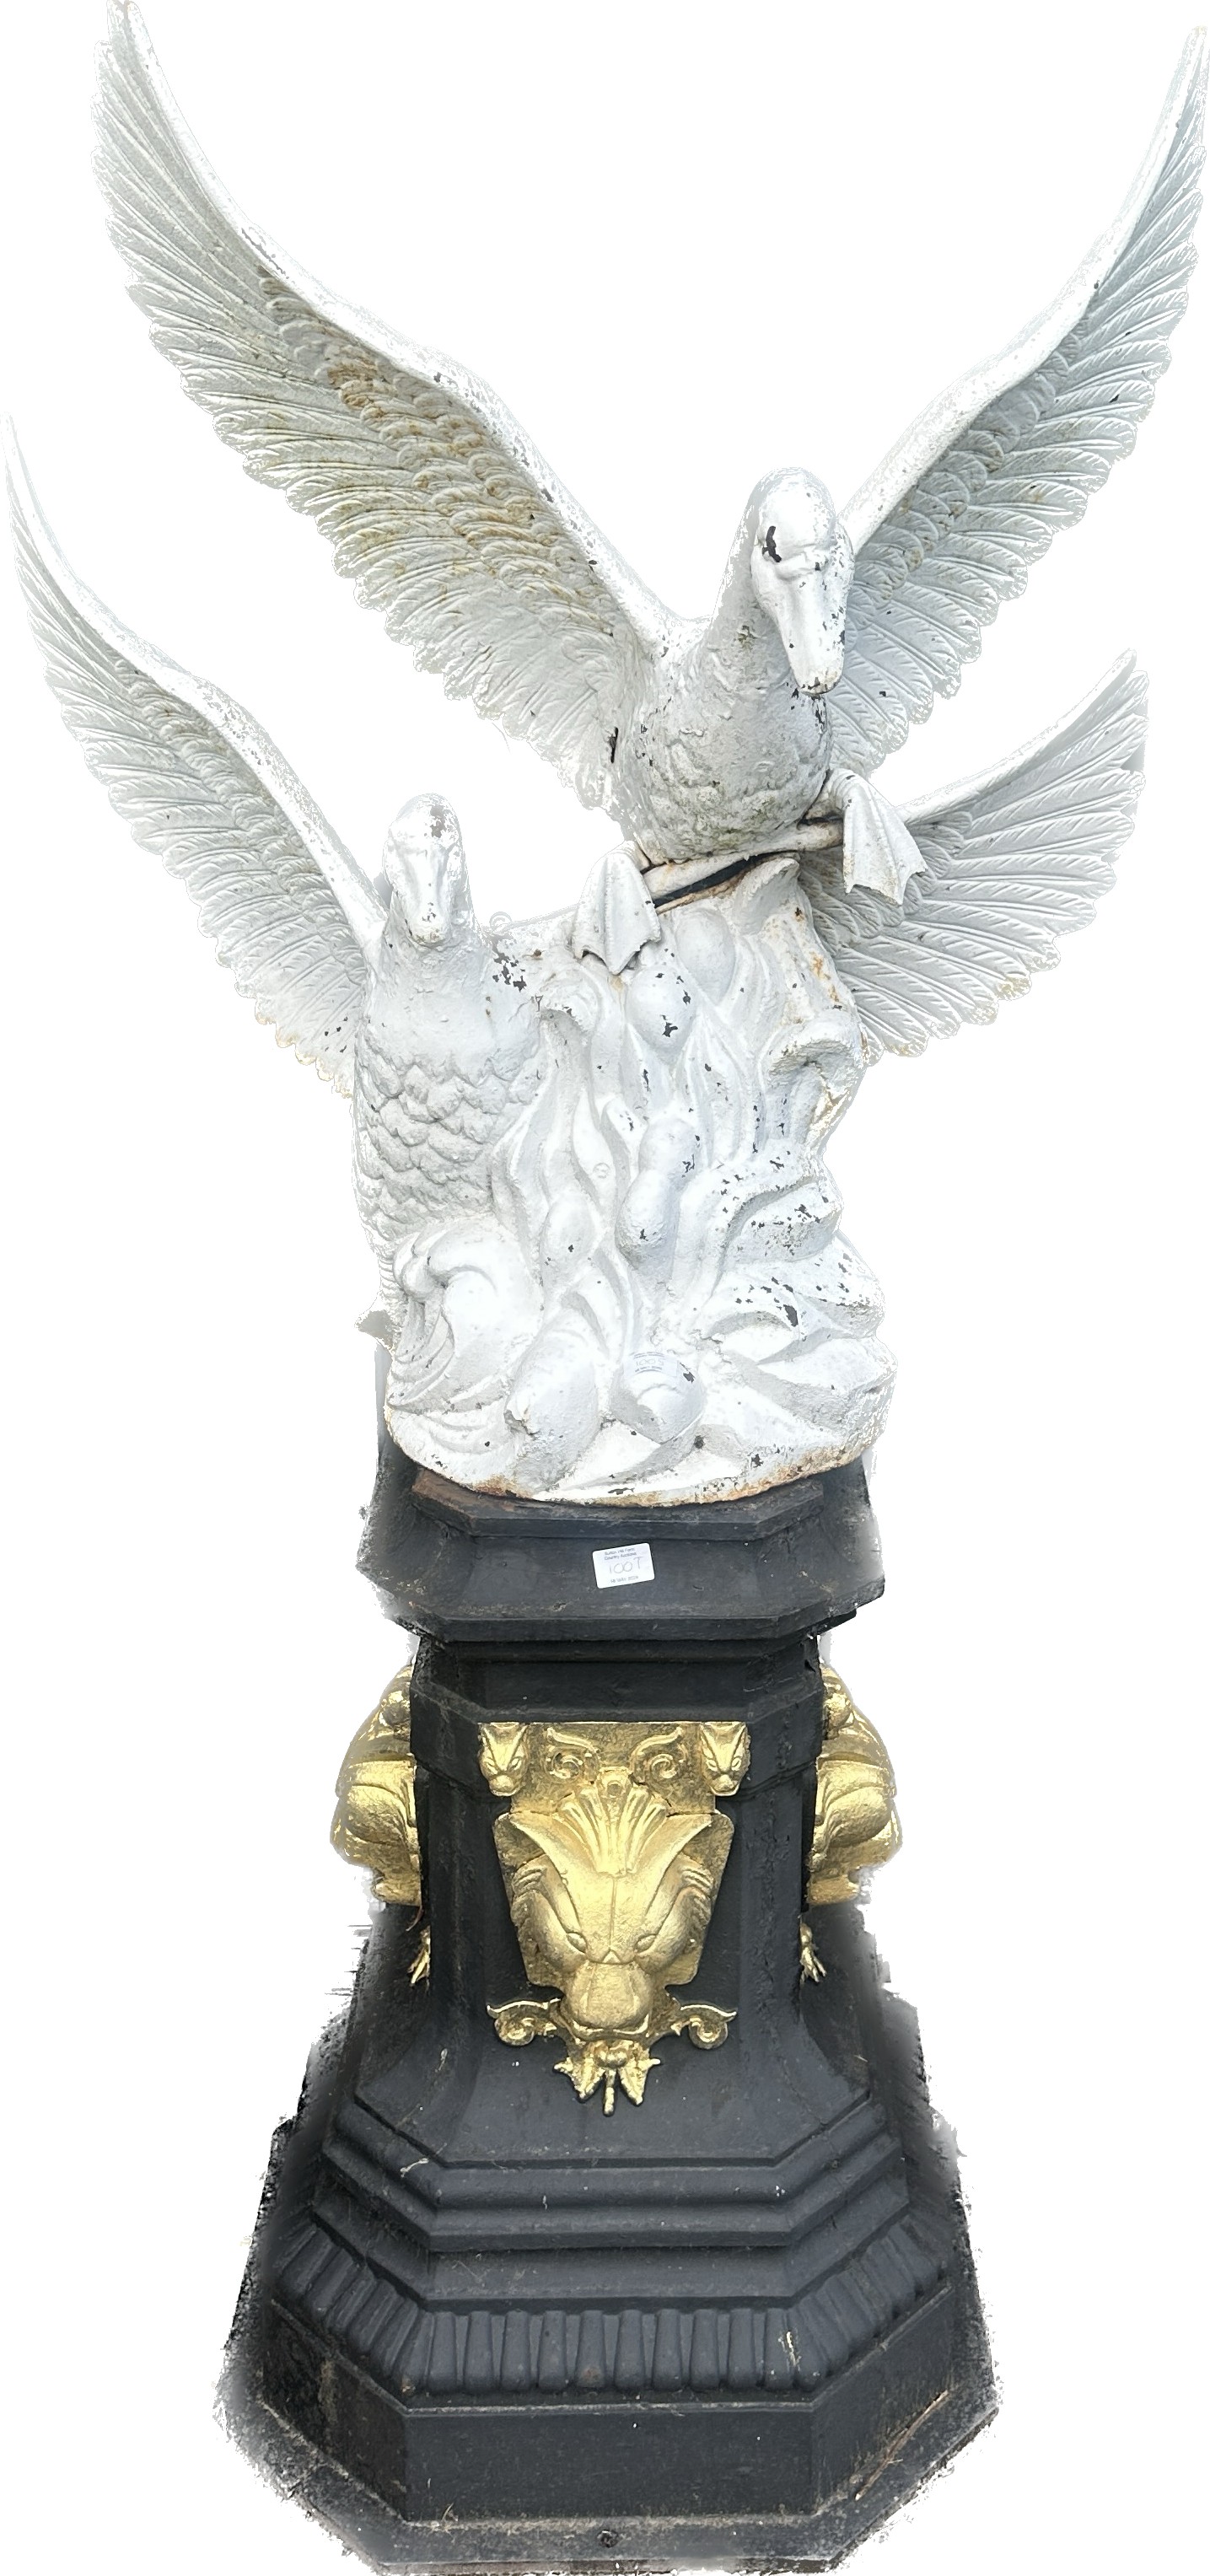 Metal double swan garden figure measures approximately 64.5 inches tall - Image 2 of 3